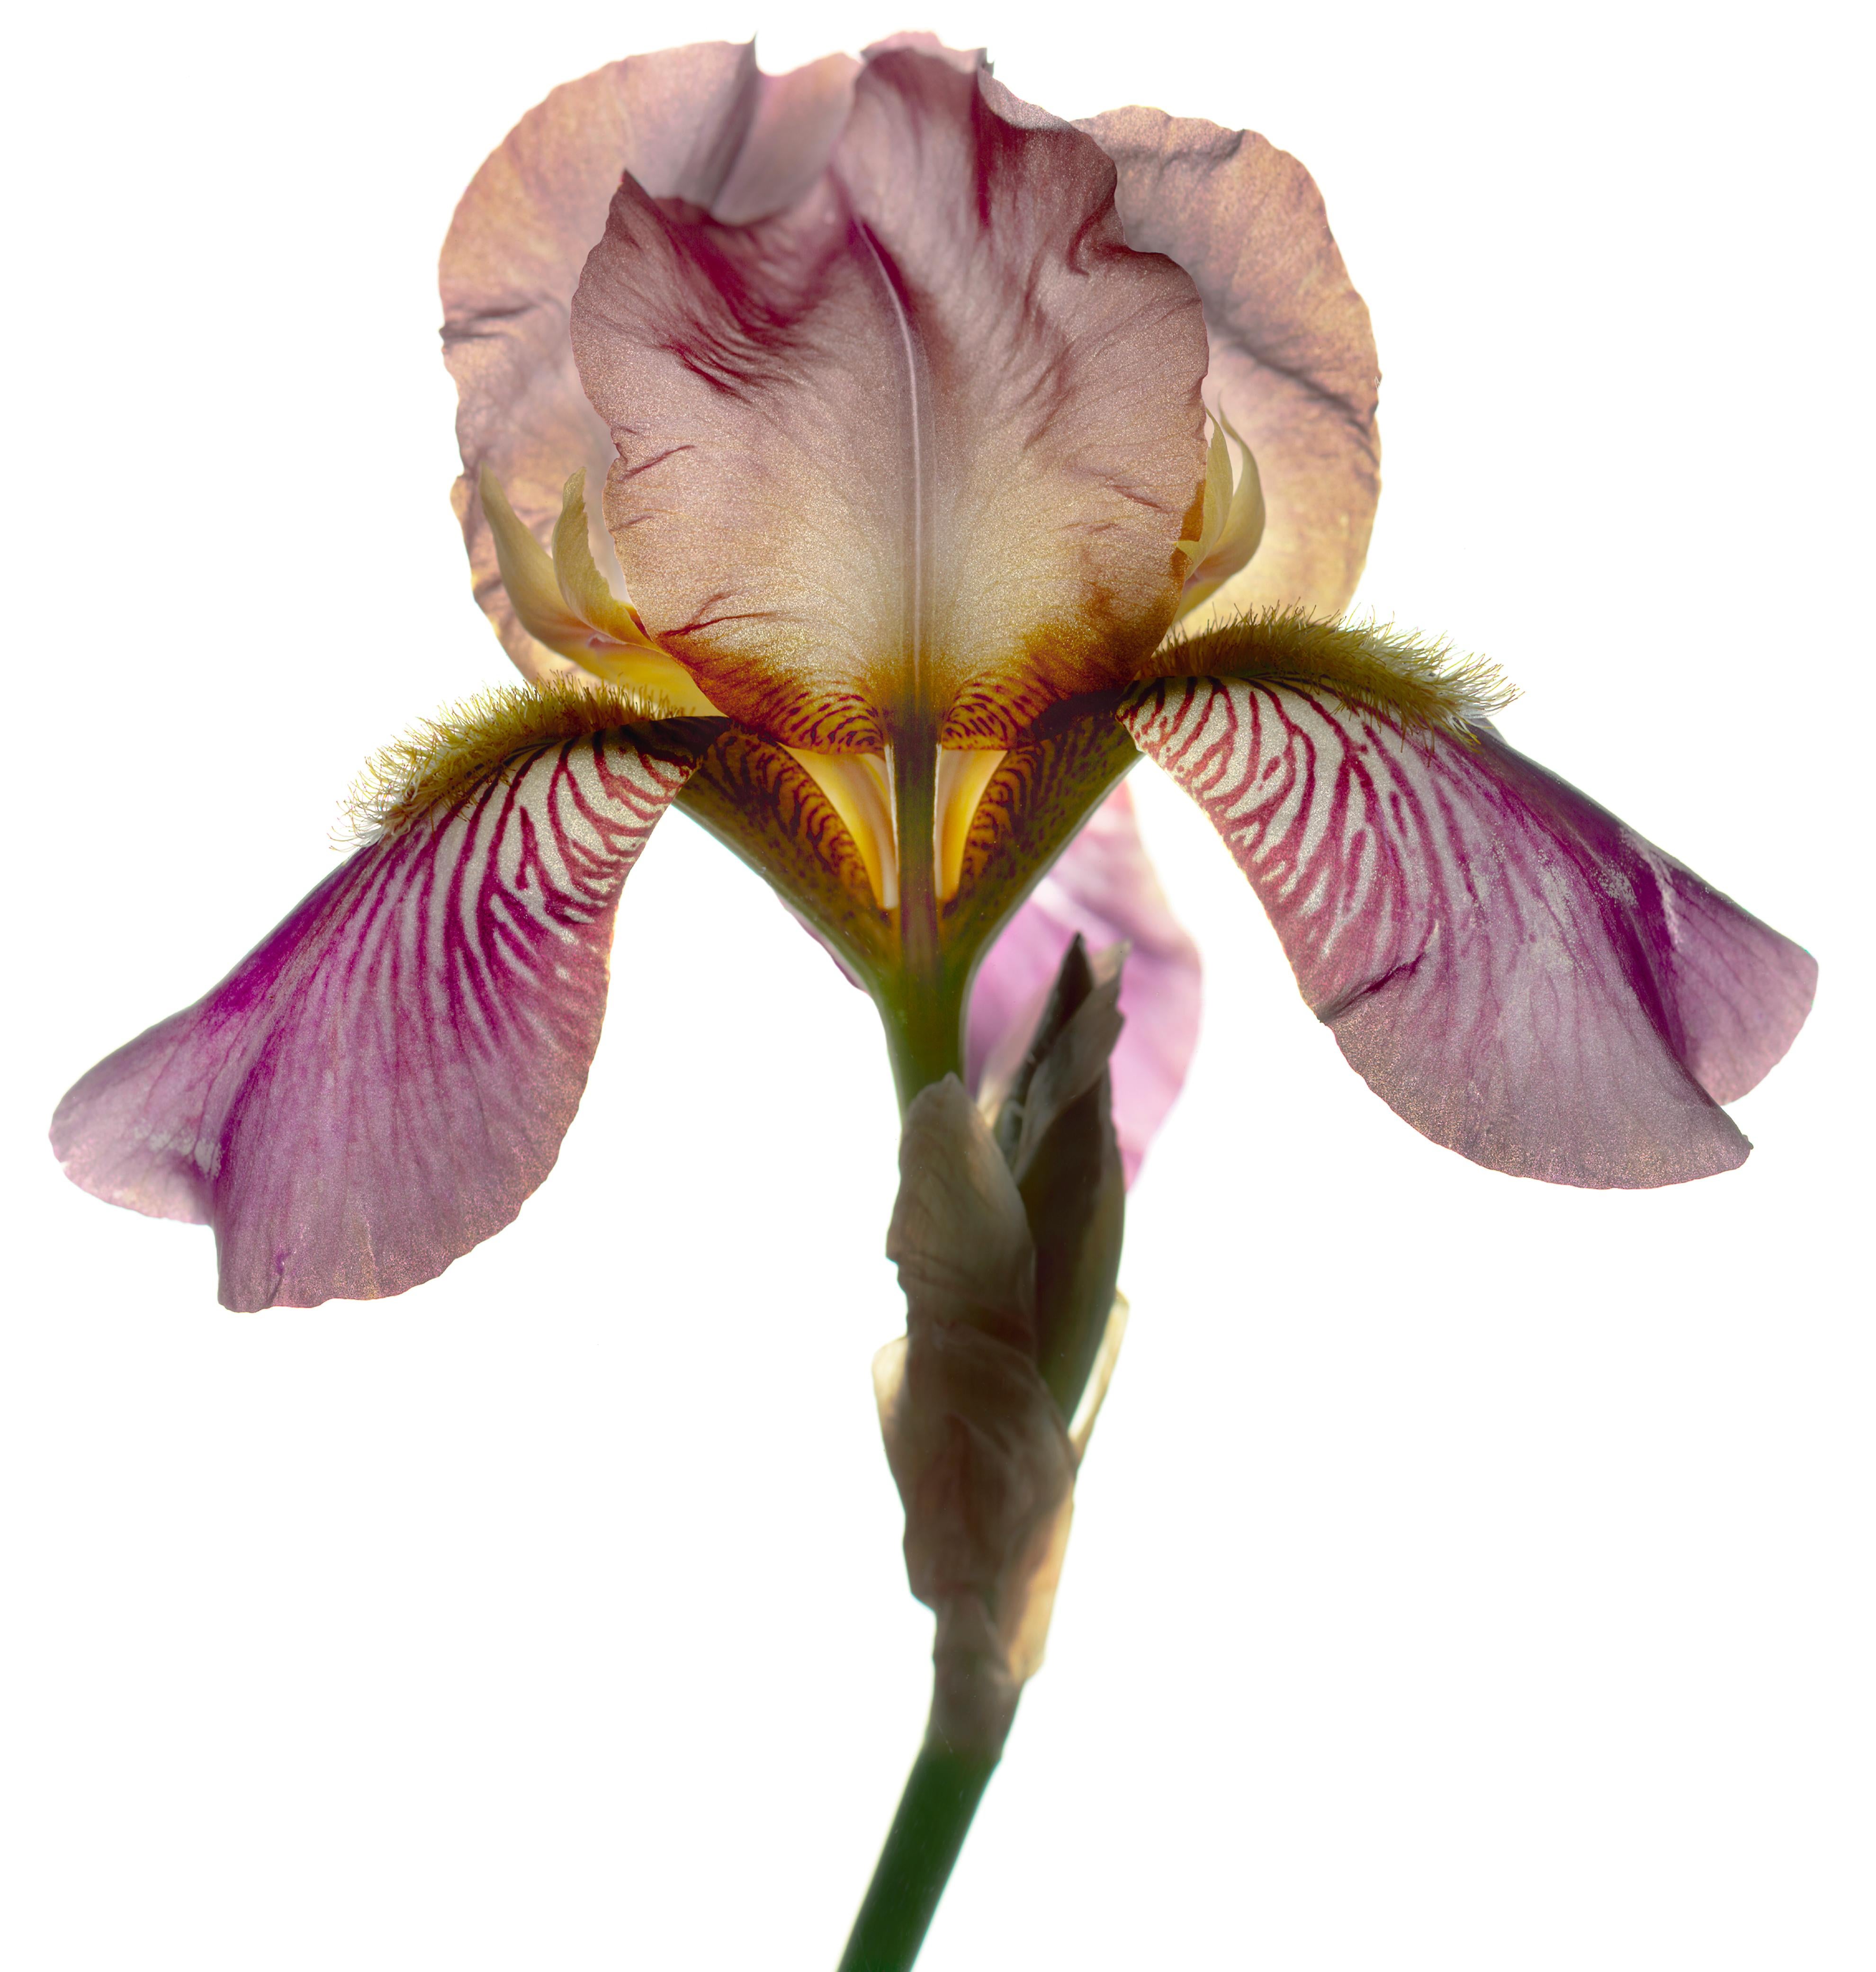 Chad Kleitsch Color Photograph - Untitled Flower # 43 (48" x 60")